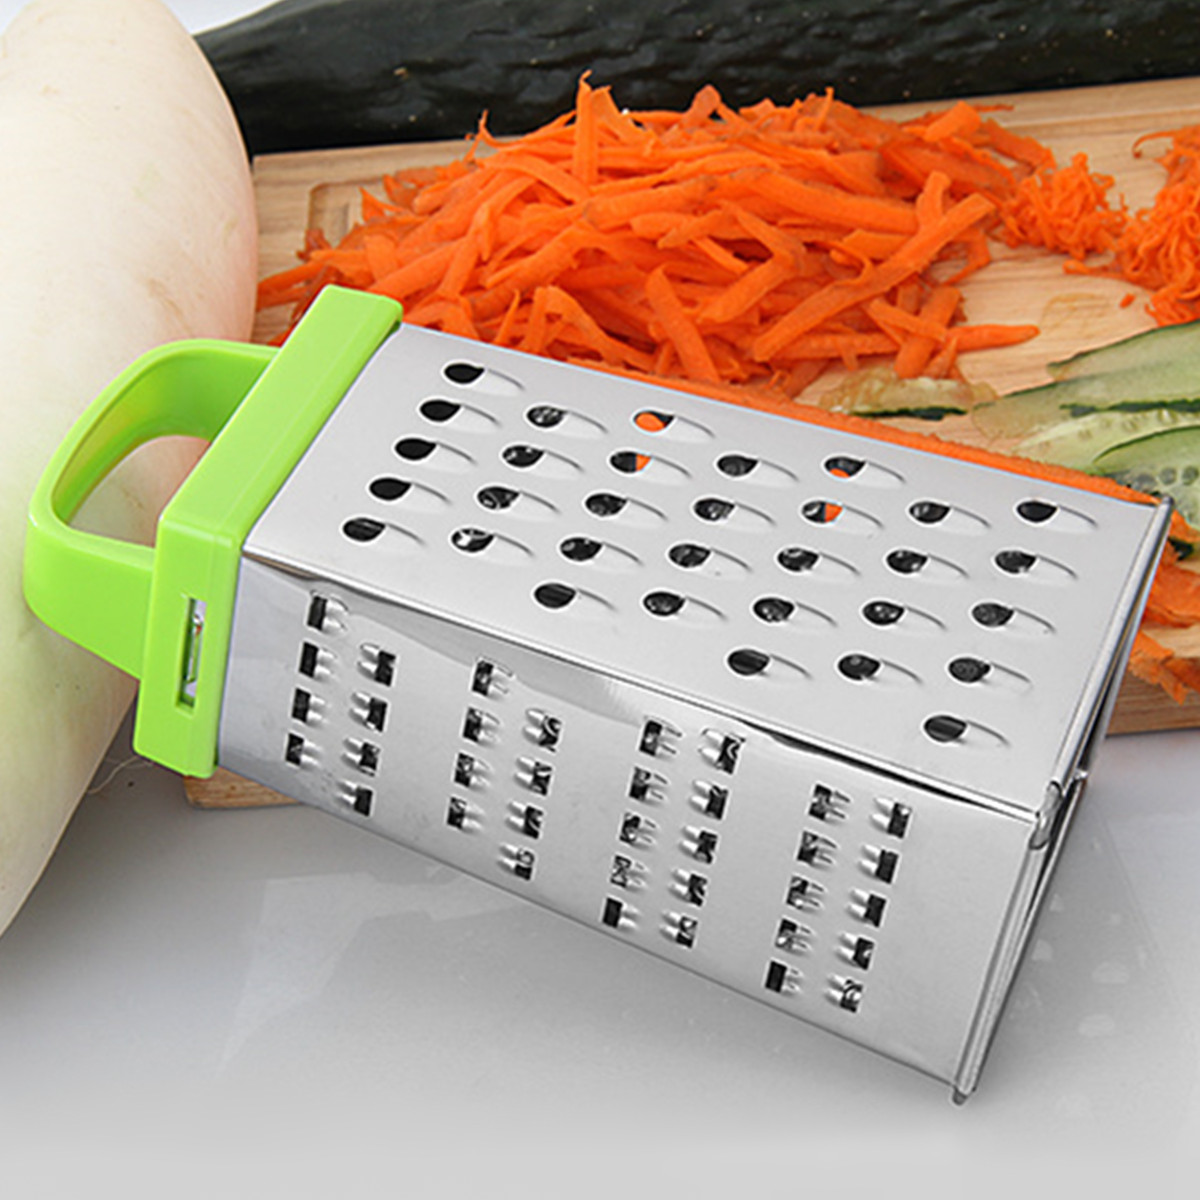 Grater-Box-Stainless-Steel-4-Sided-Multi-Funtion-Cheese-Vegetable-With-Container-Lunch-Box-1304772-4